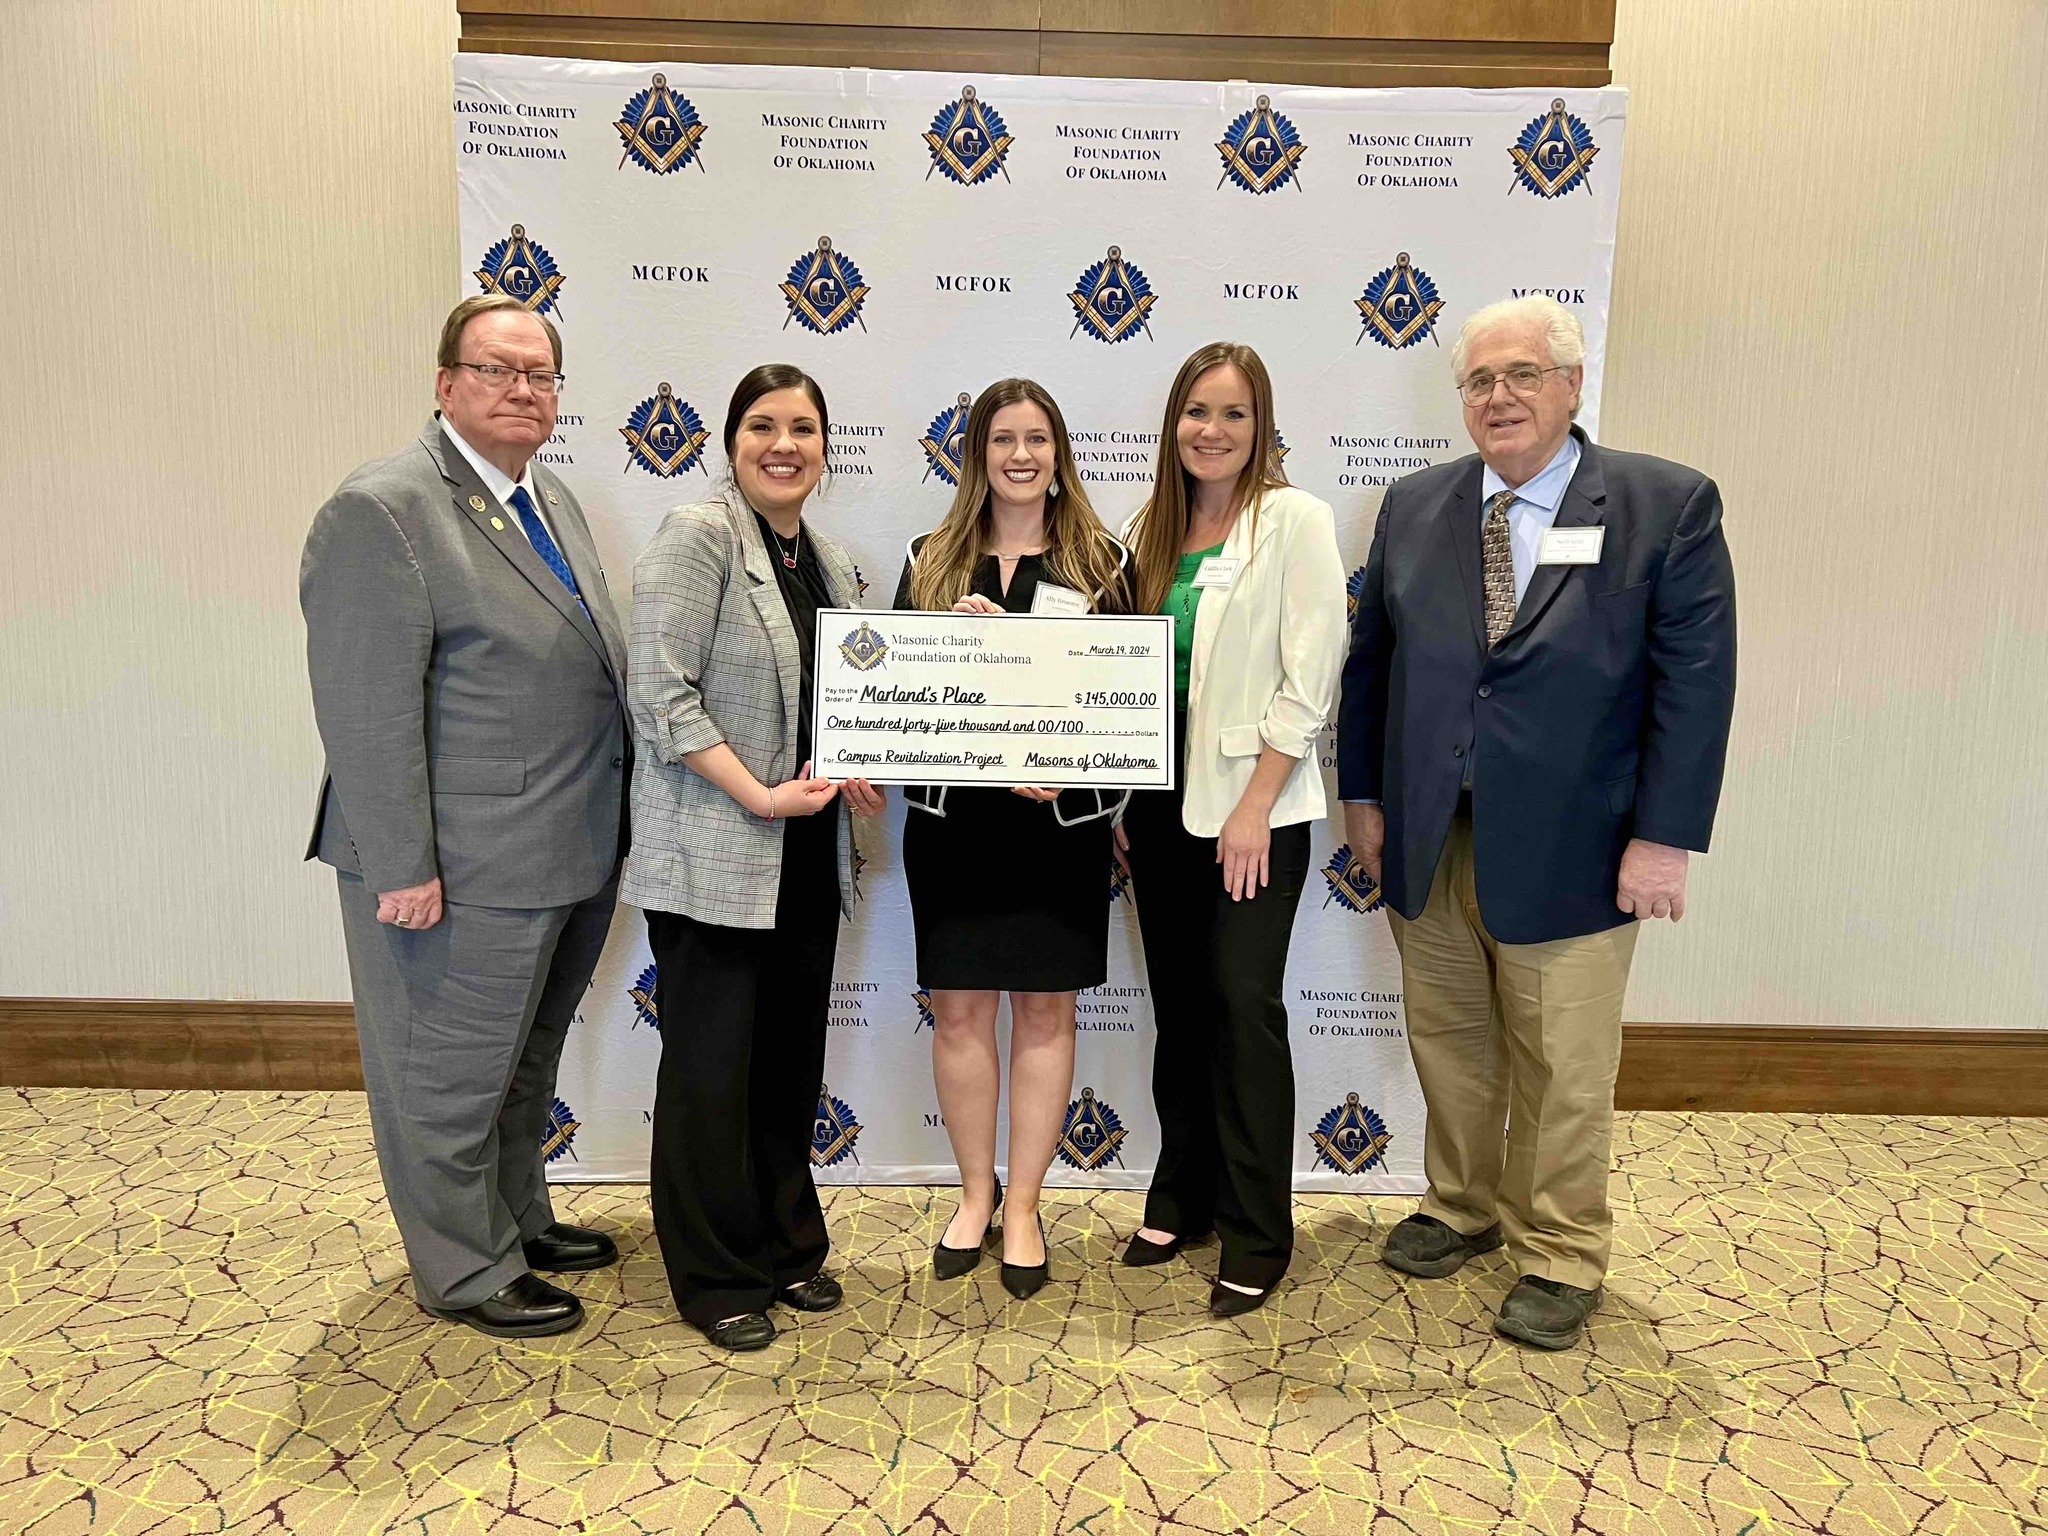 Marland’s Place Receives $145,000 Grant From the Masonic Charity Foundation of Oklahoma